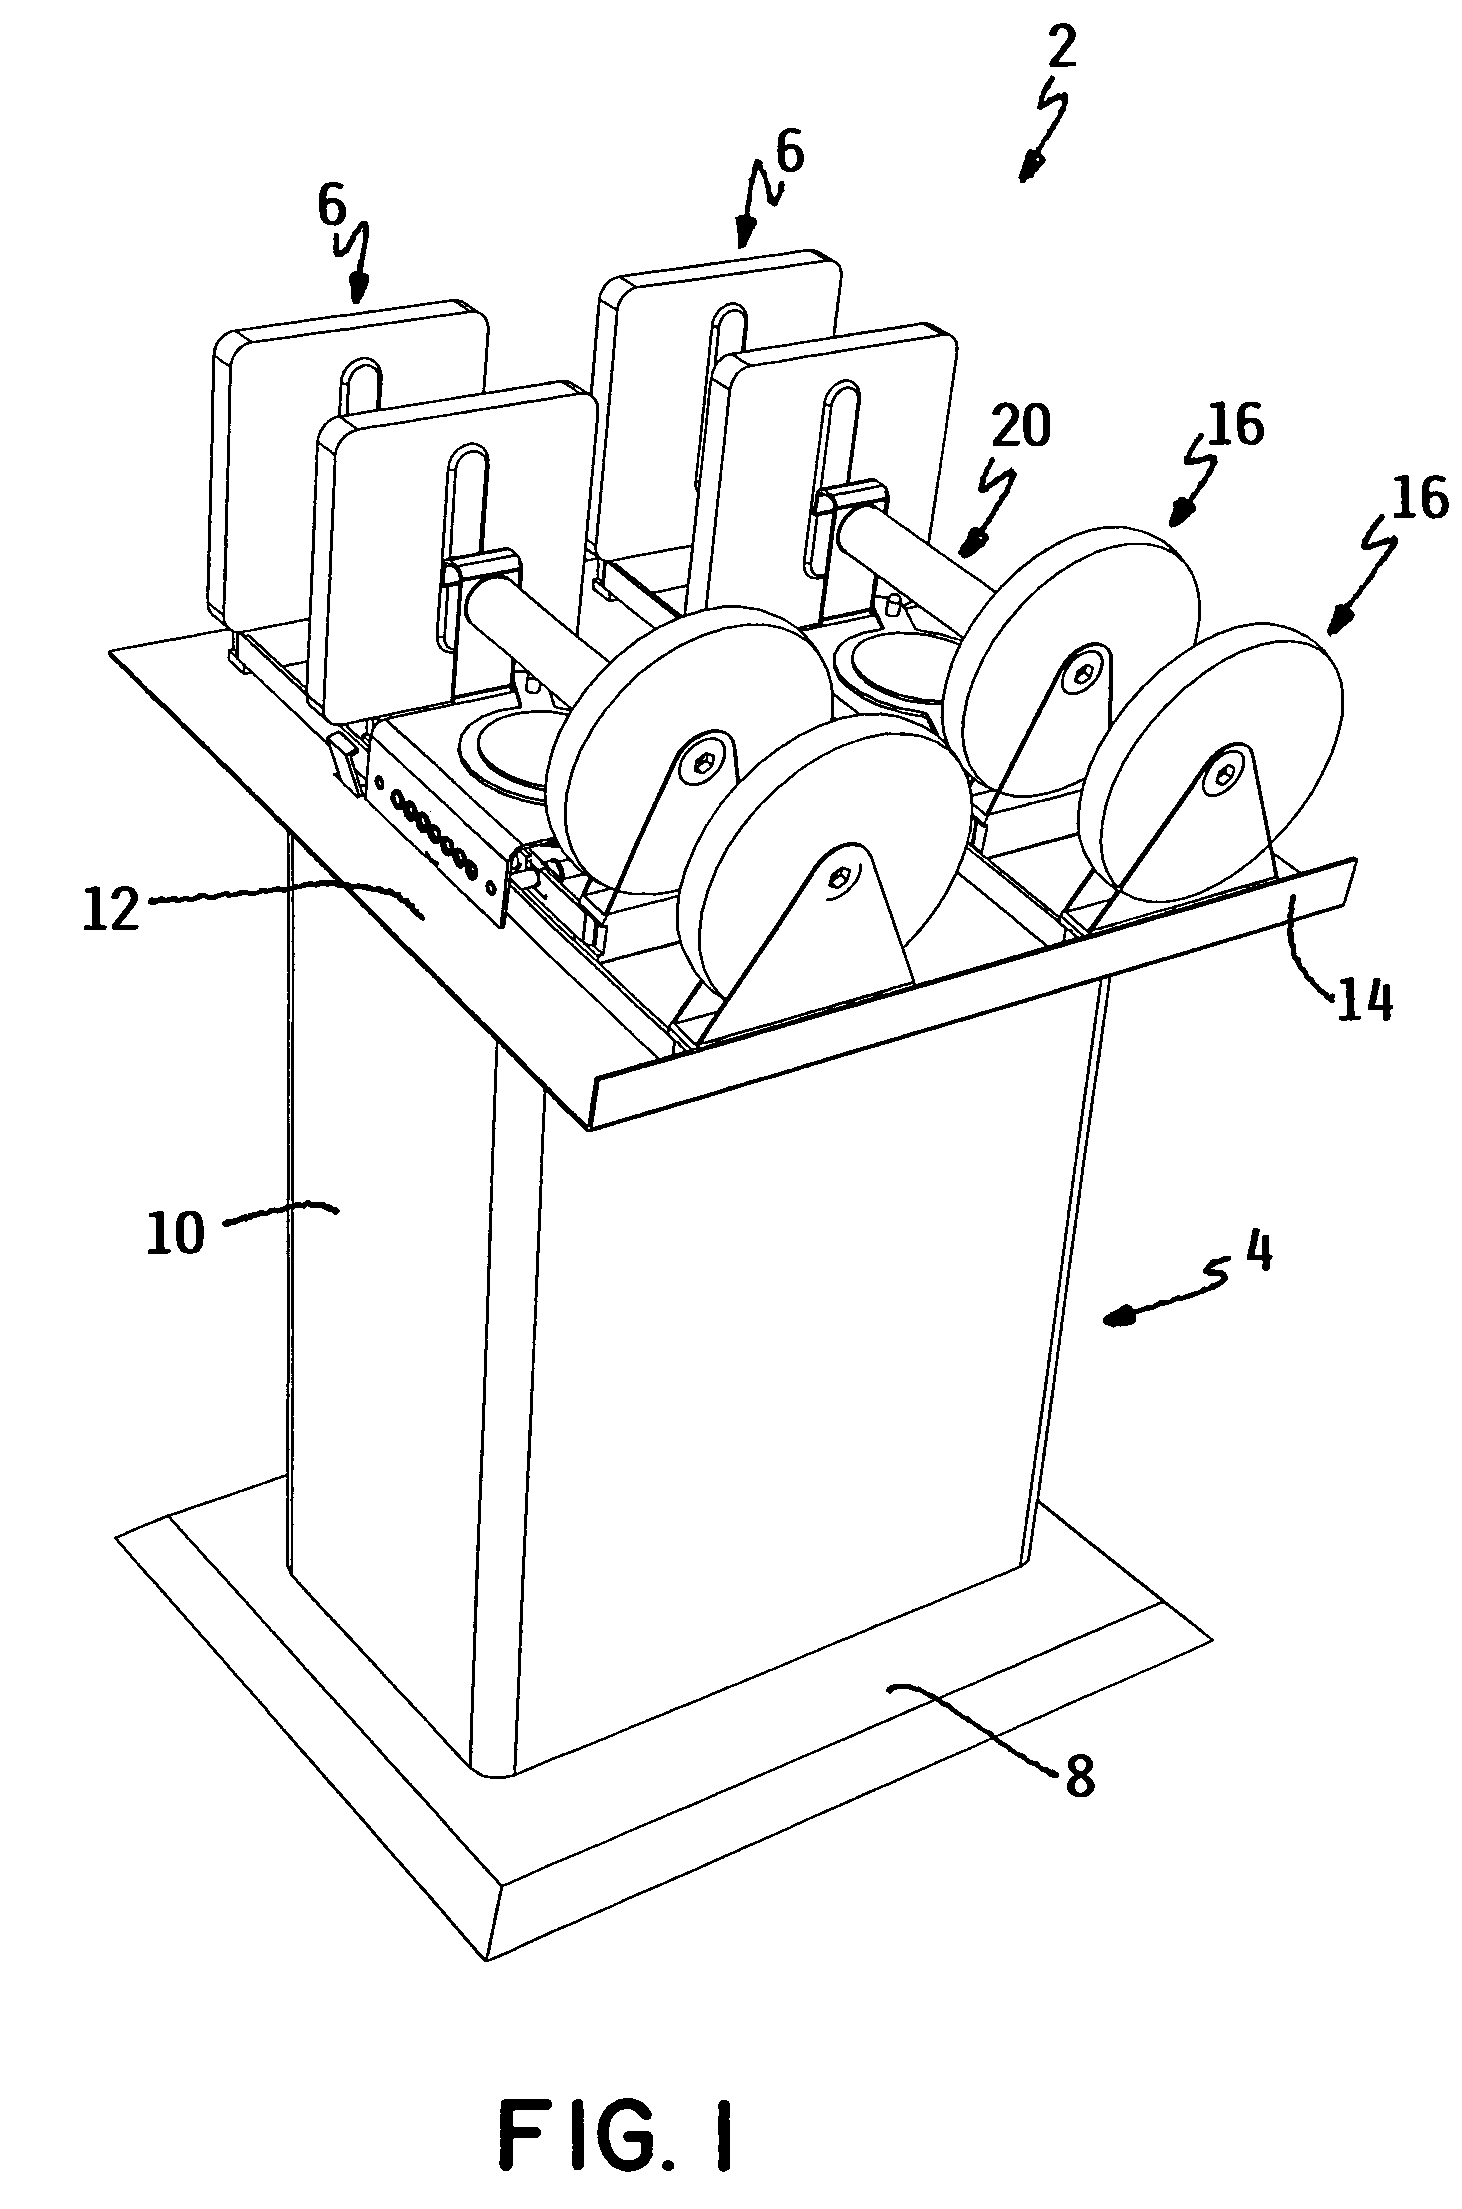 Weight selection and adjustment system for selectorized dumbbells including motorized selector positioning